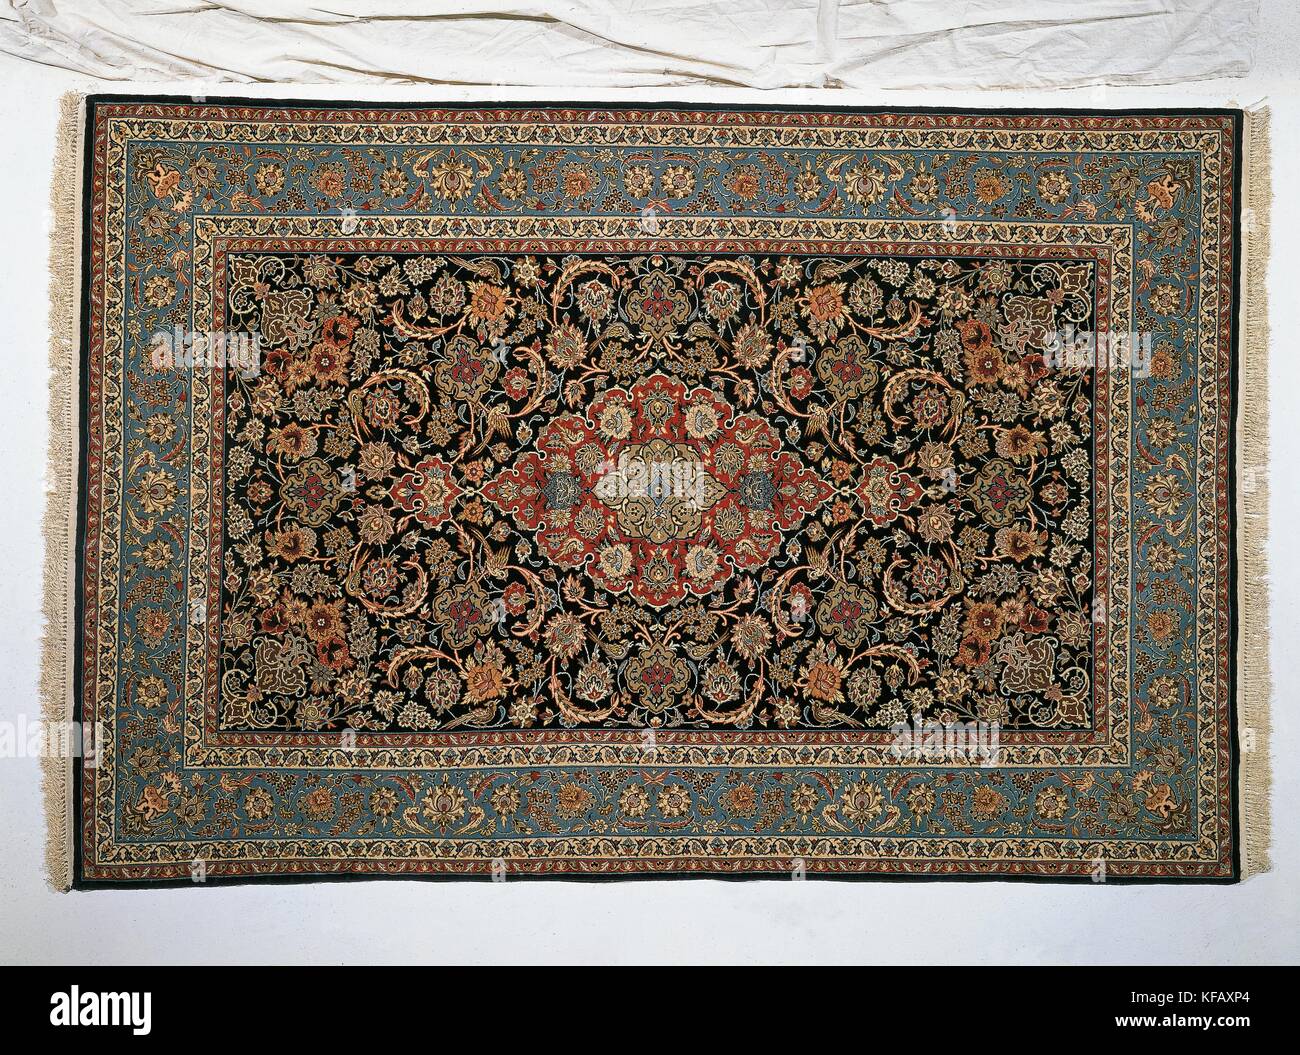 Rugs, Iran. Sarug rug with central medallion and floral motifs, measuring 3.06 x 2.10 m. Stock Photo